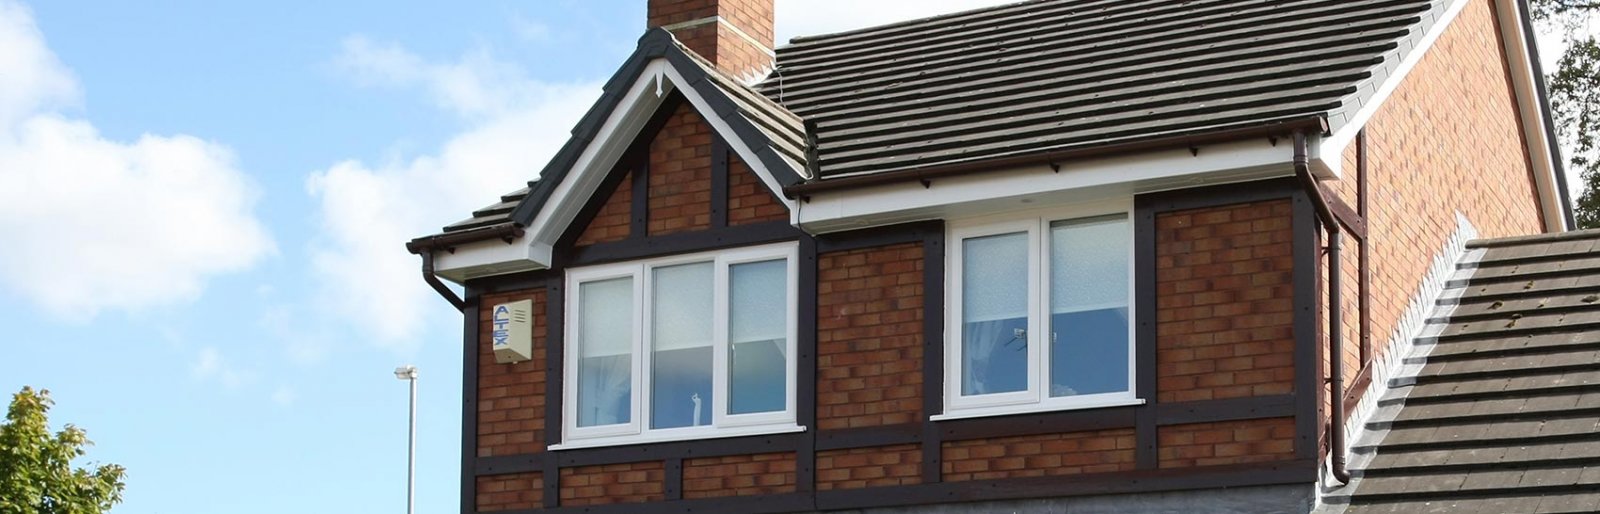 An update to uPVC fascia and gutter